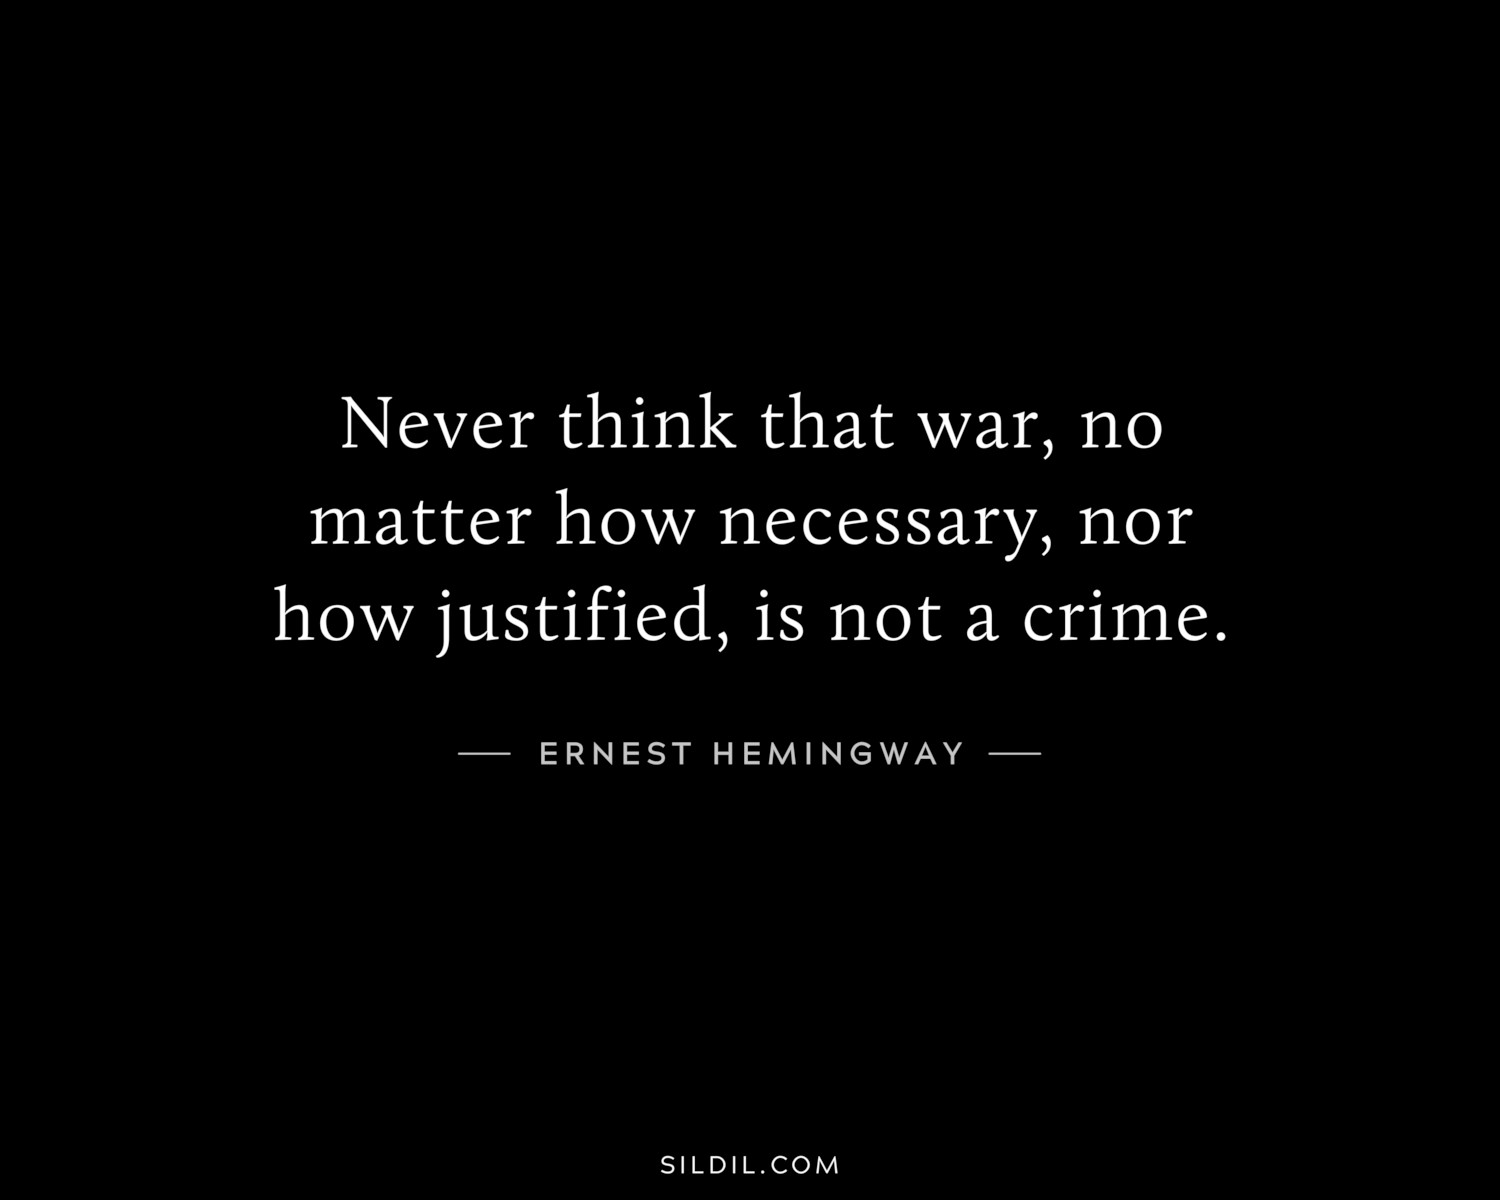 Never think that war, no matter how necessary, nor how justified, is not a crime.